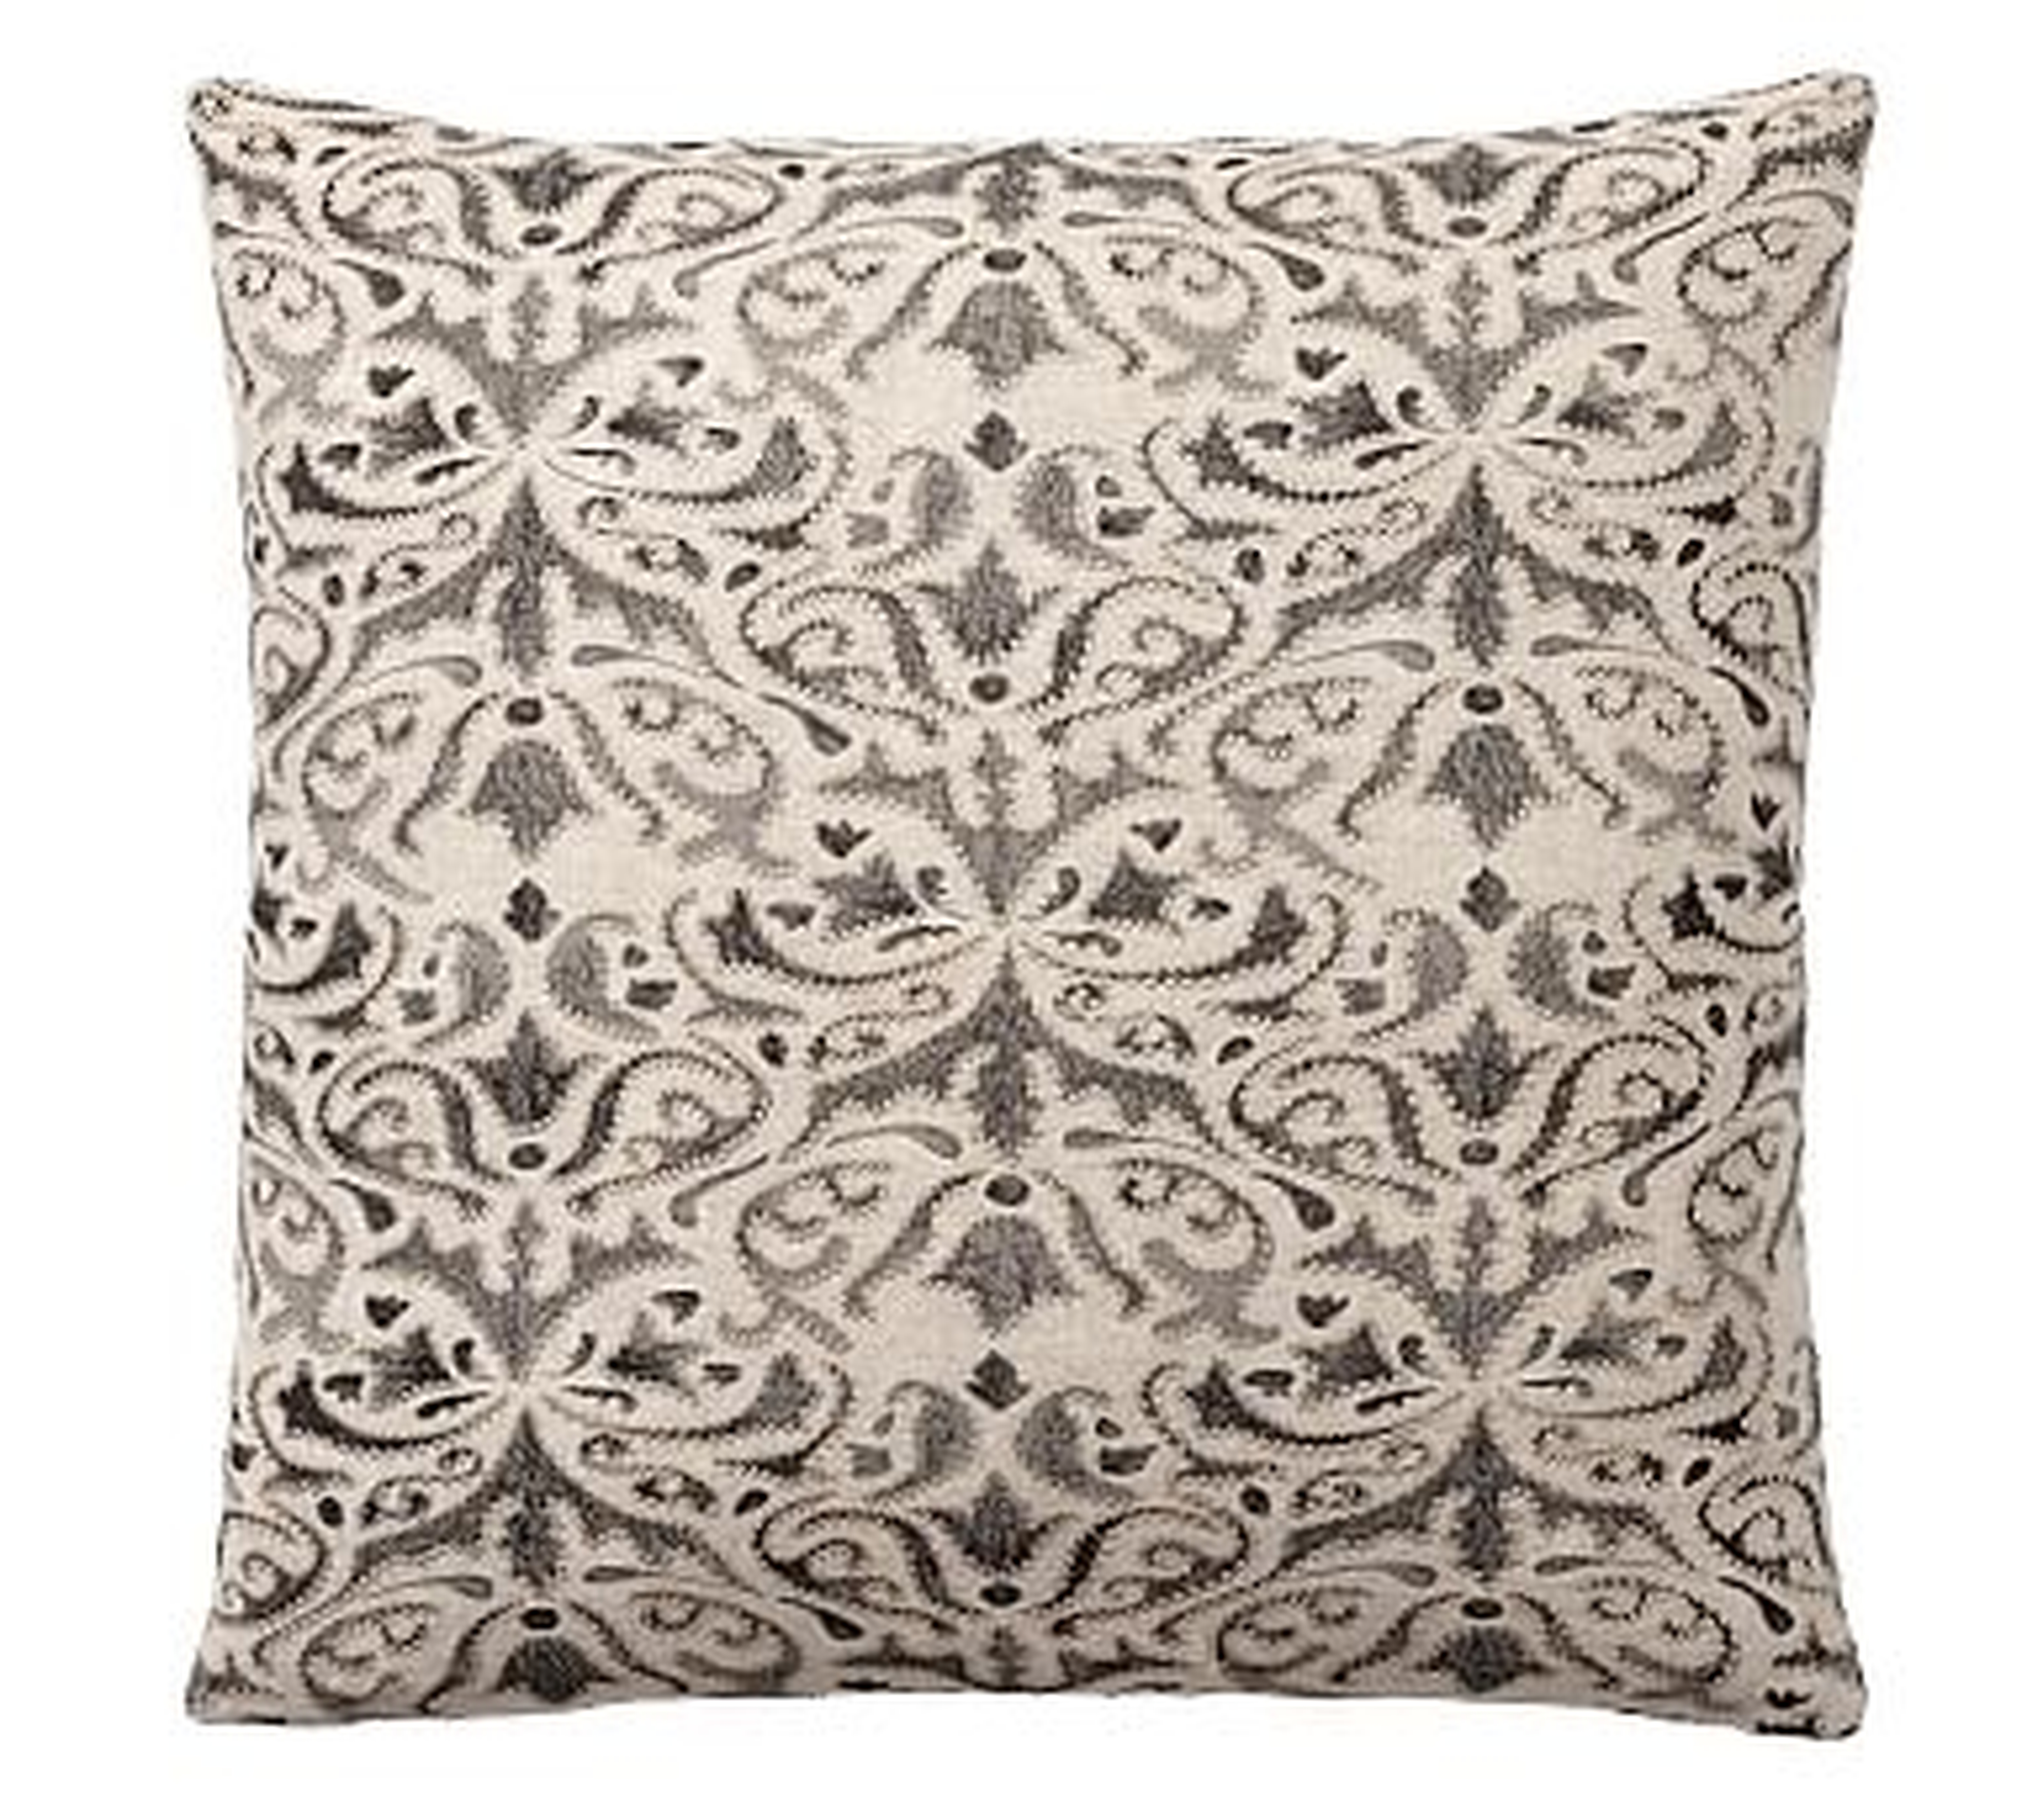 Reilley Embroidered Pillow Cover, 22", Steel Gray - Pottery Barn